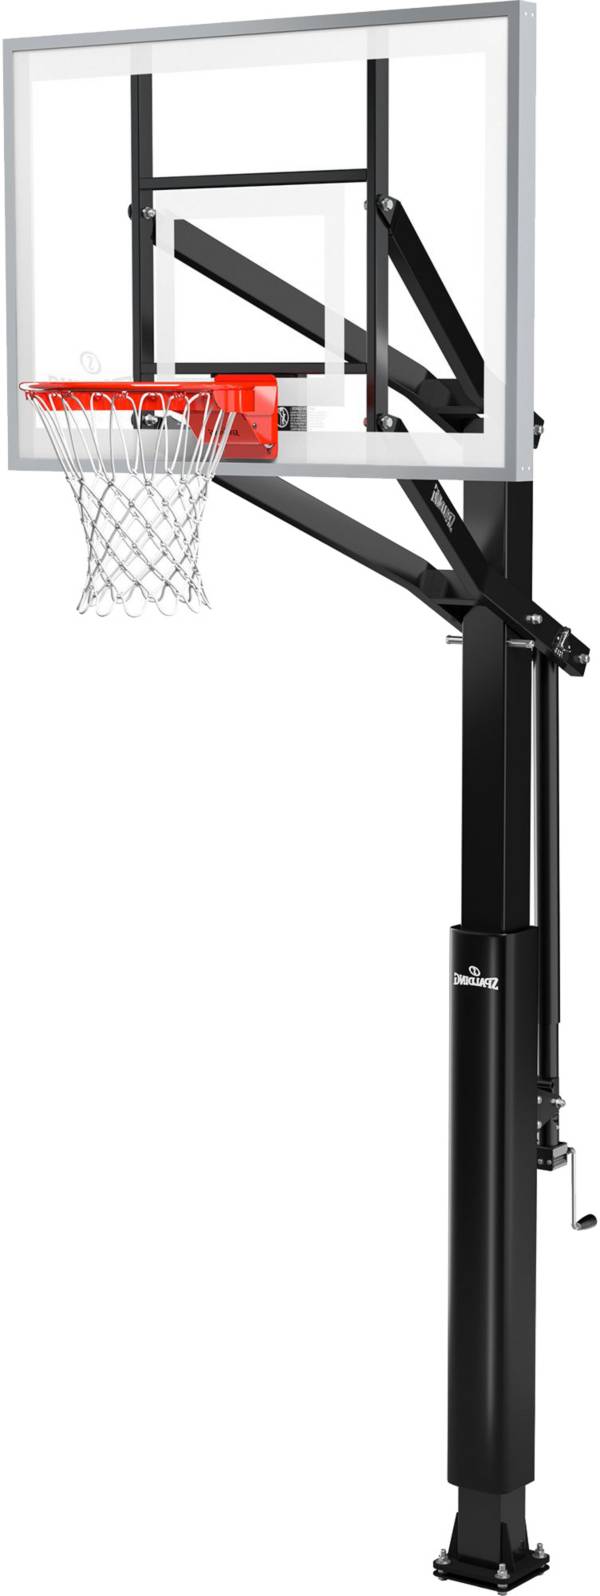 Spalding 888 Series In-Ground Basketball System 